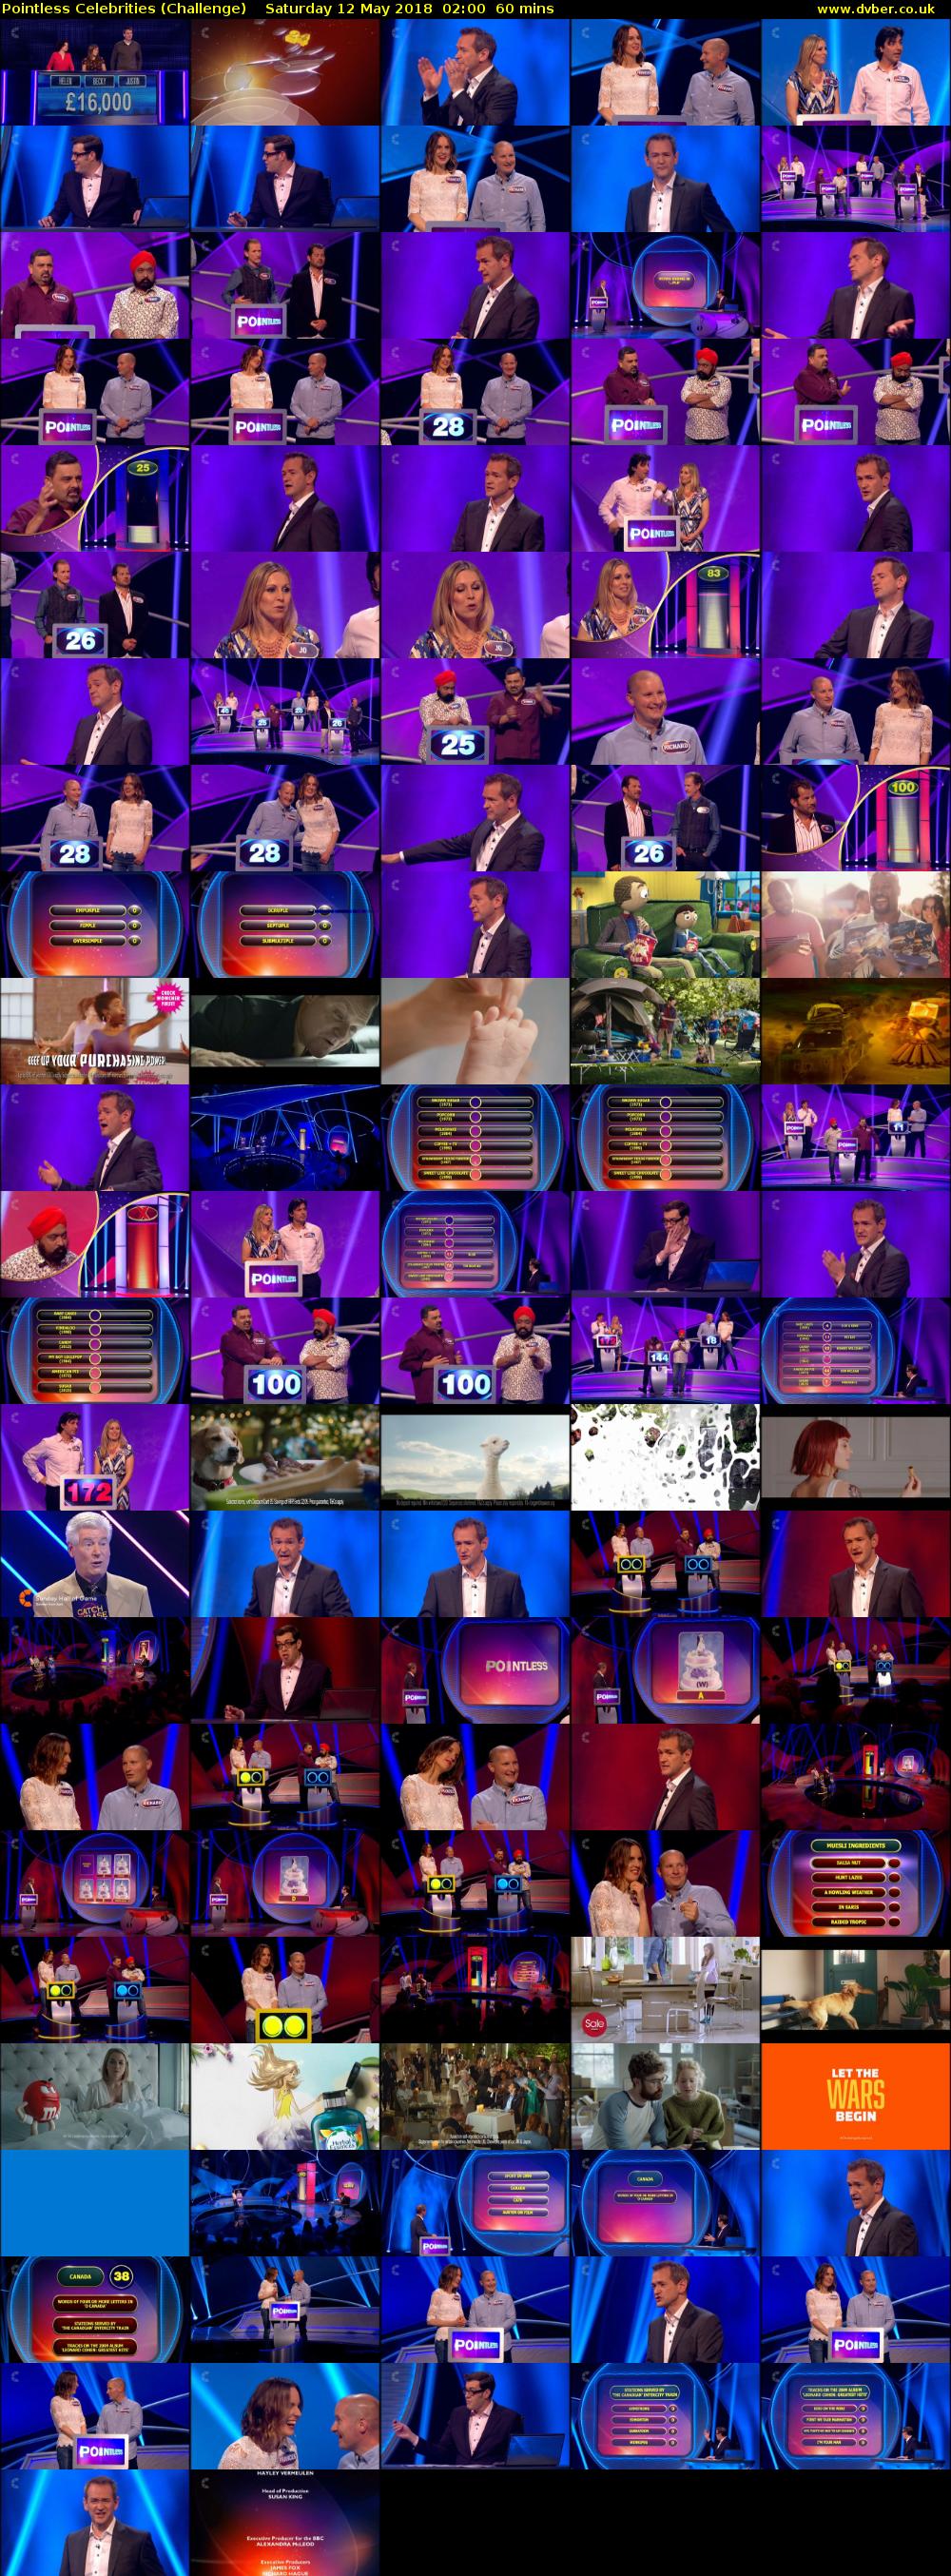 Pointless Celebrities (Challenge) Saturday 12 May 2018 02:00 - 03:00